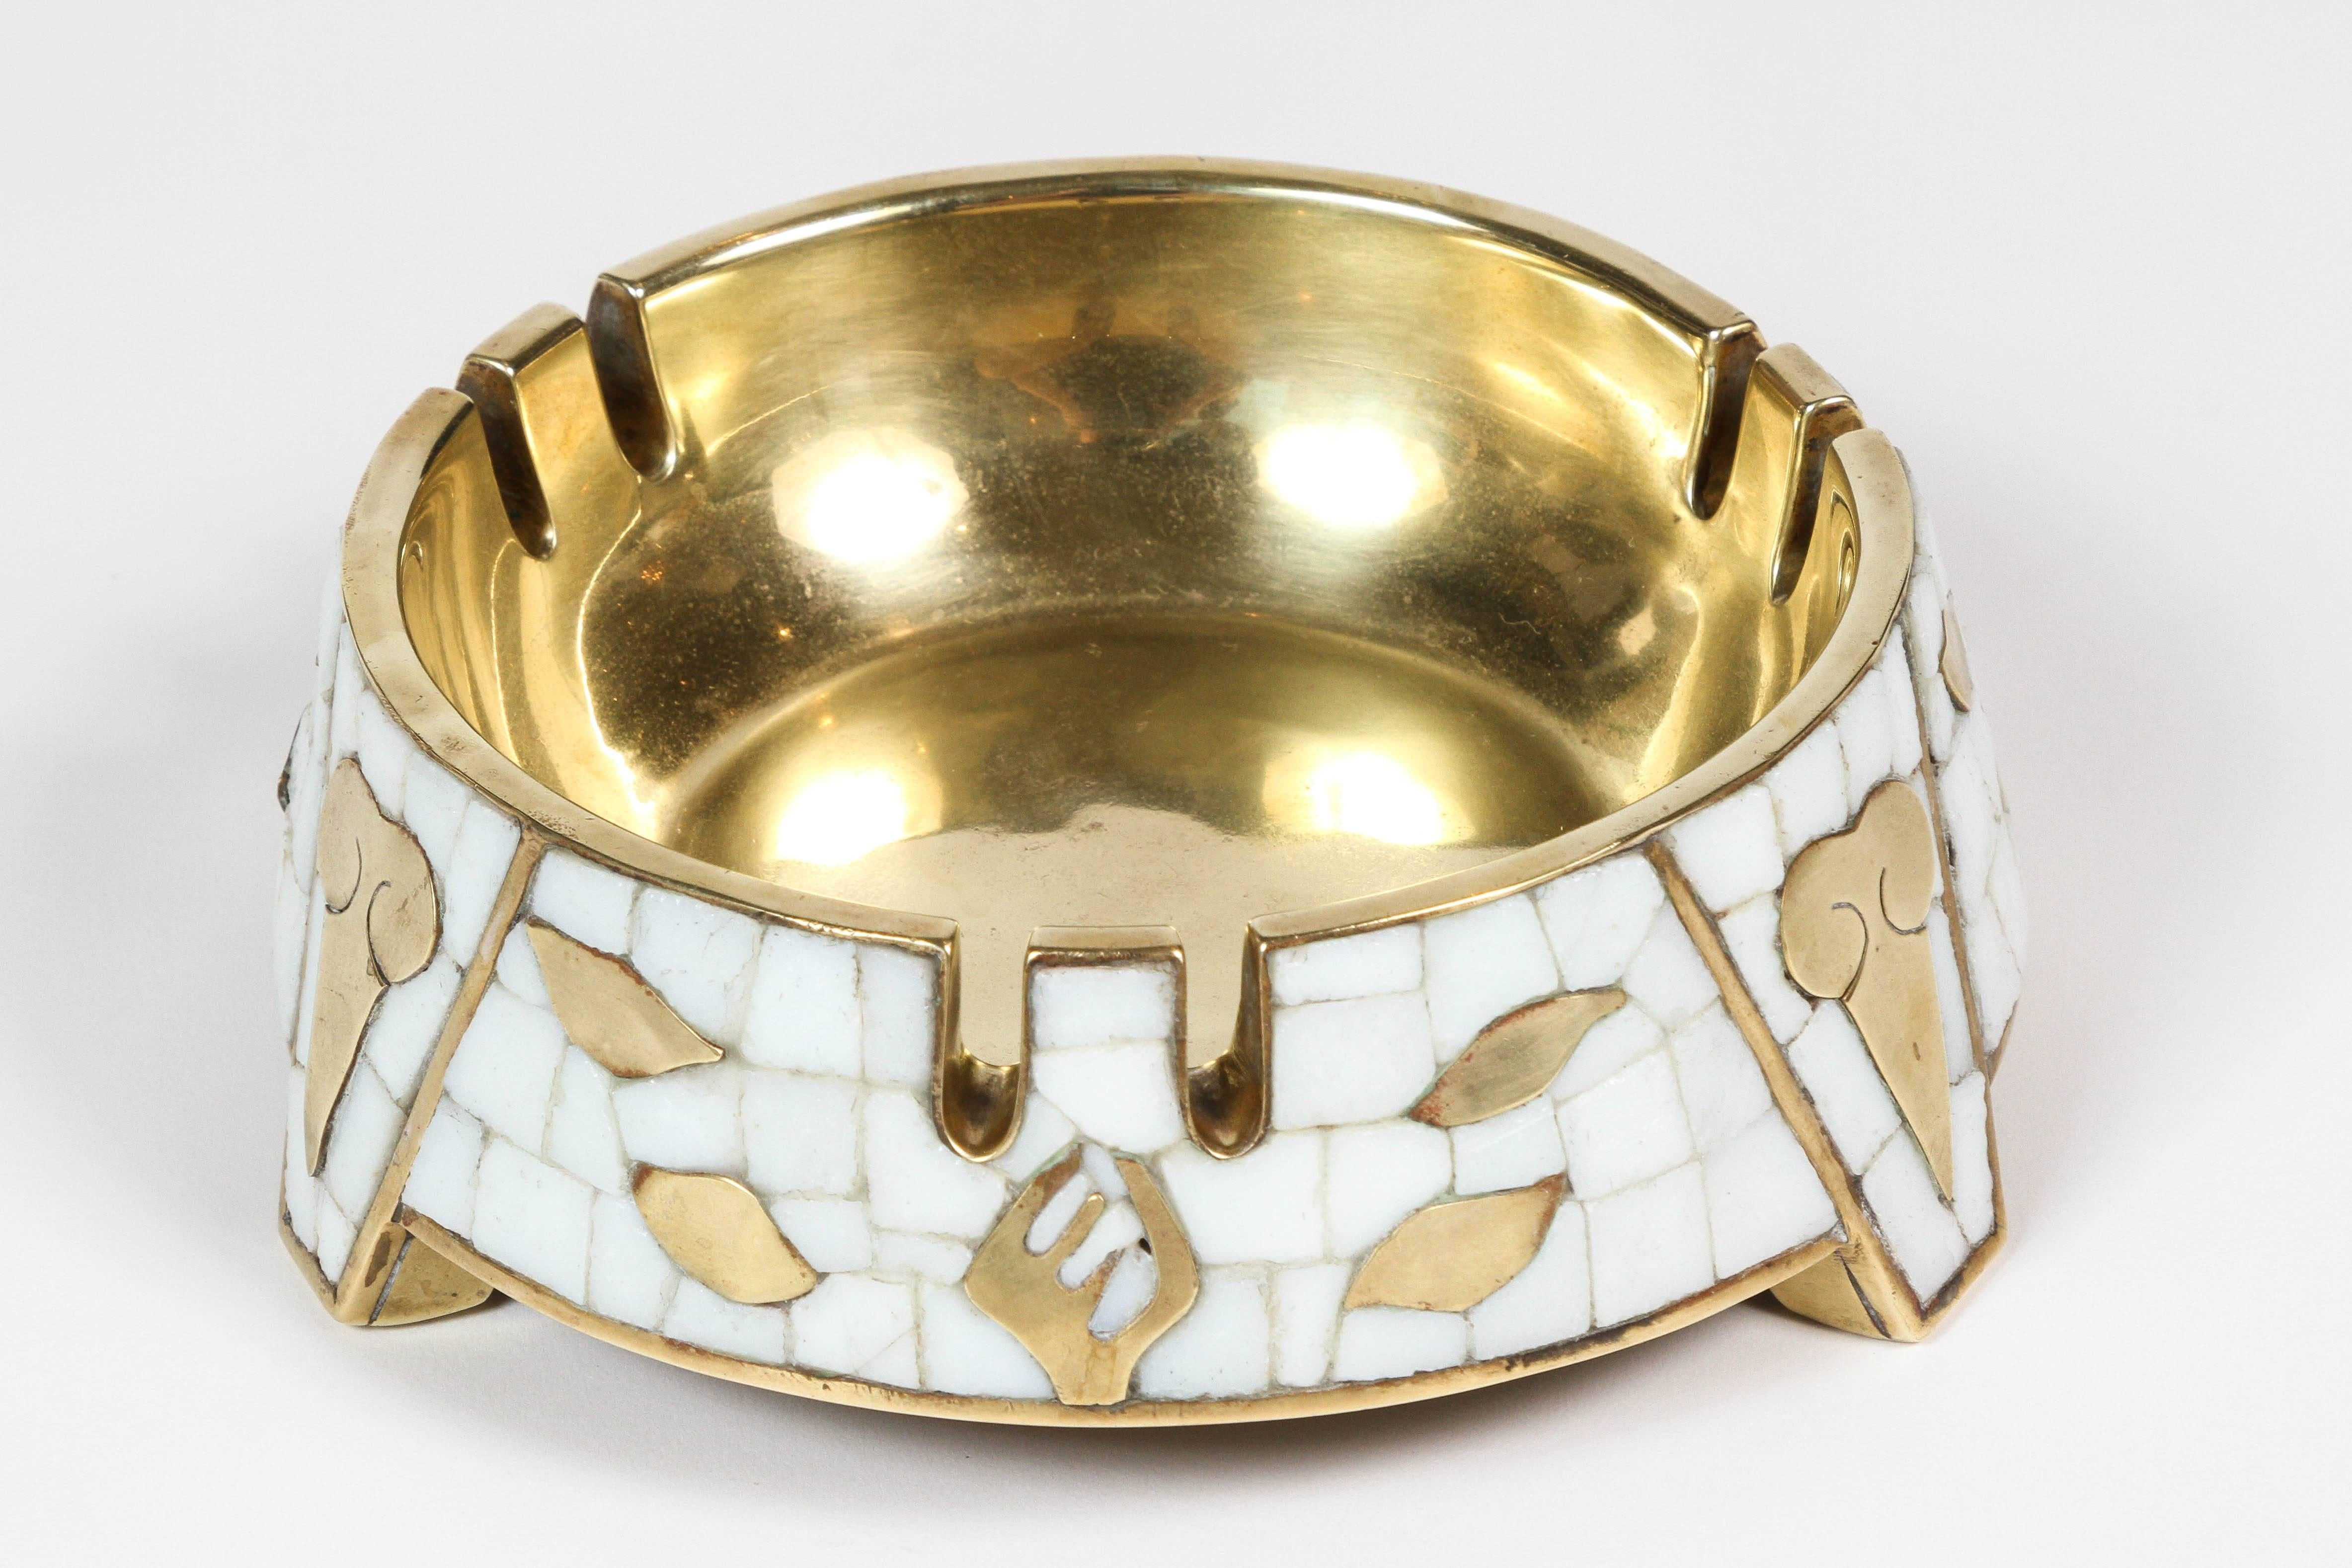 Midcentury large brass with white glass tesserae mosaic ashtray by Mexican modernist Salvador Vaca Terán (1920 –1974). Stamped and numbered.